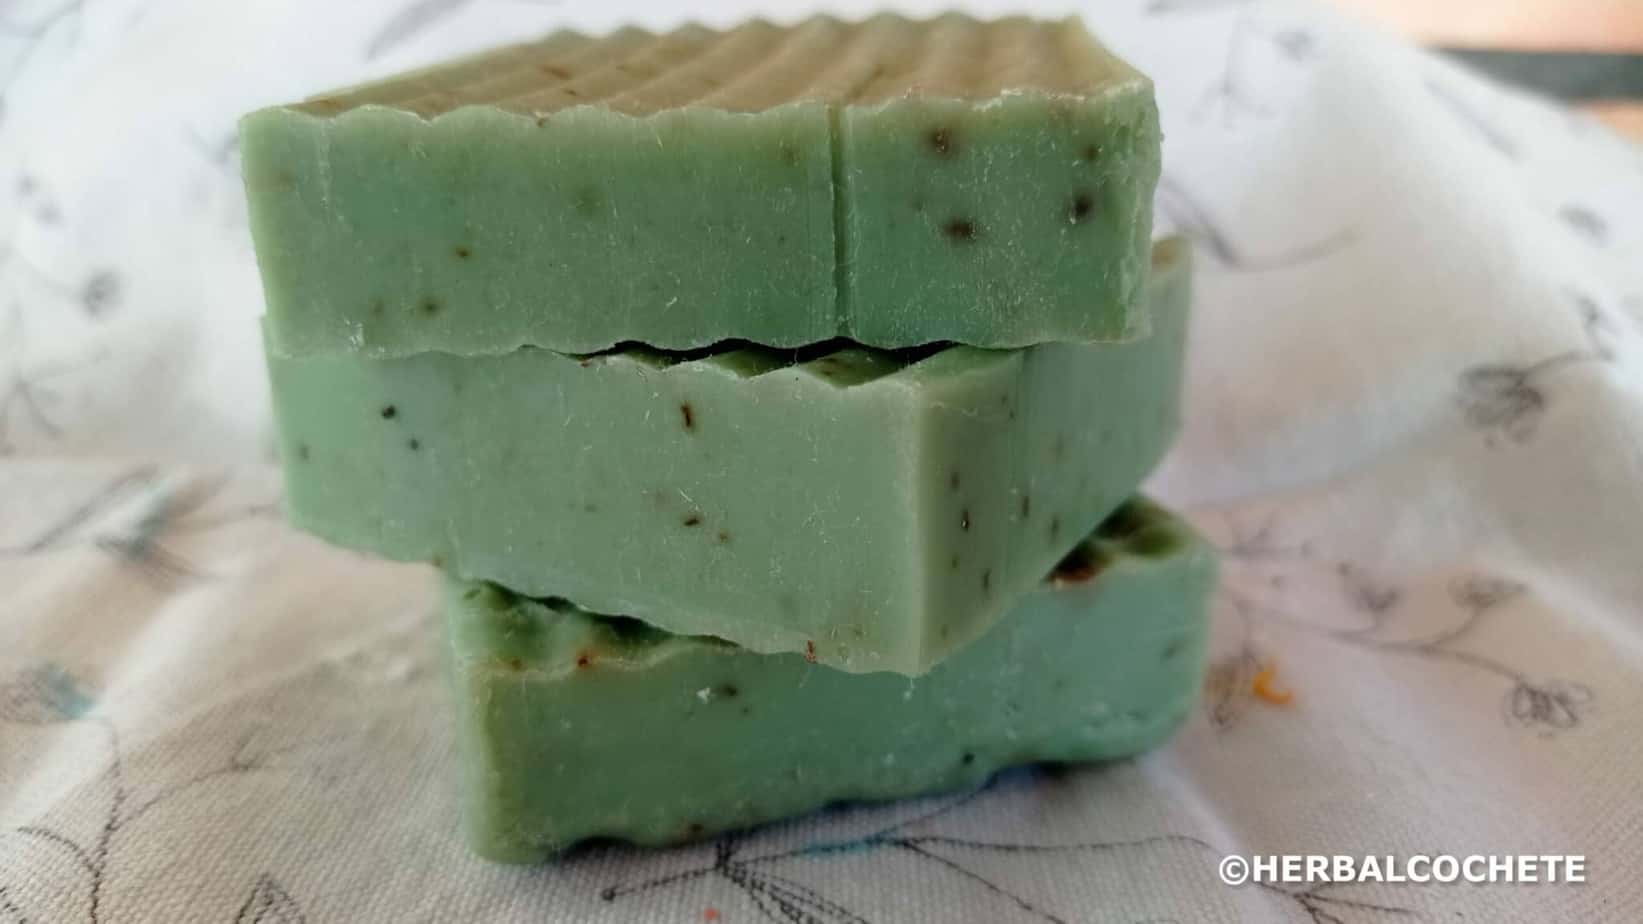 Three green soap bars scented with rosemary and eucalyptus